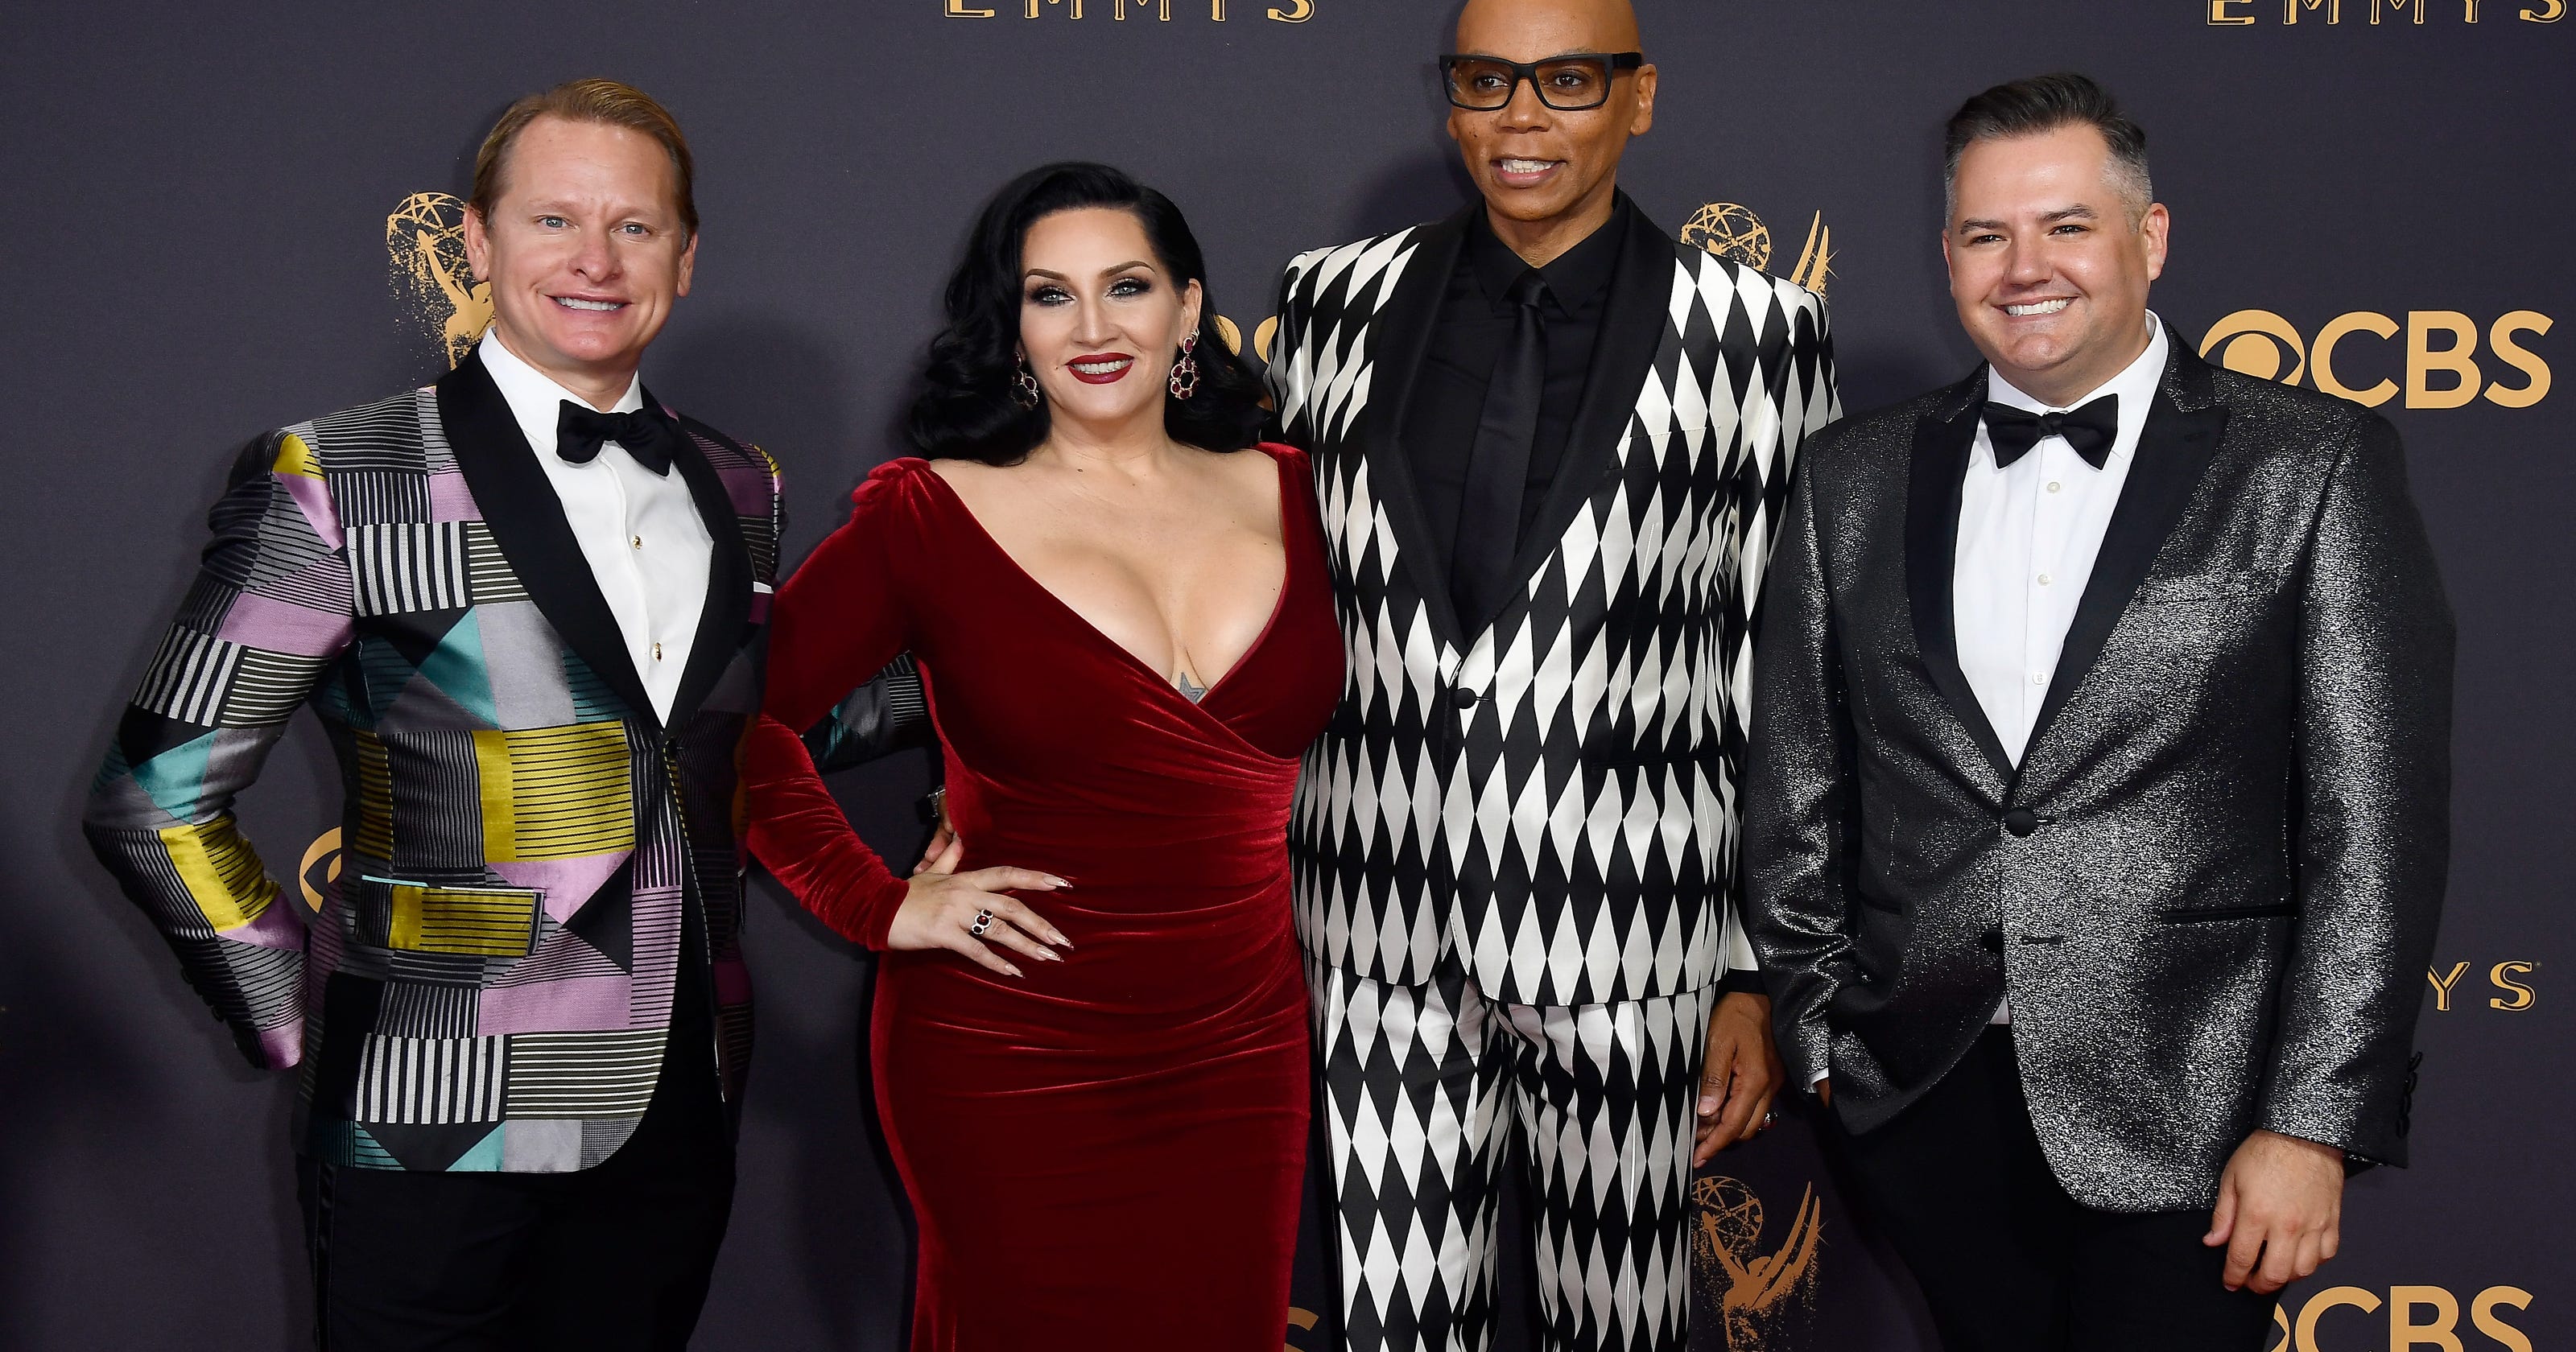 Carson Kressley to replace Ross Mathews as host at gala in Palm Springs3200 x 1680